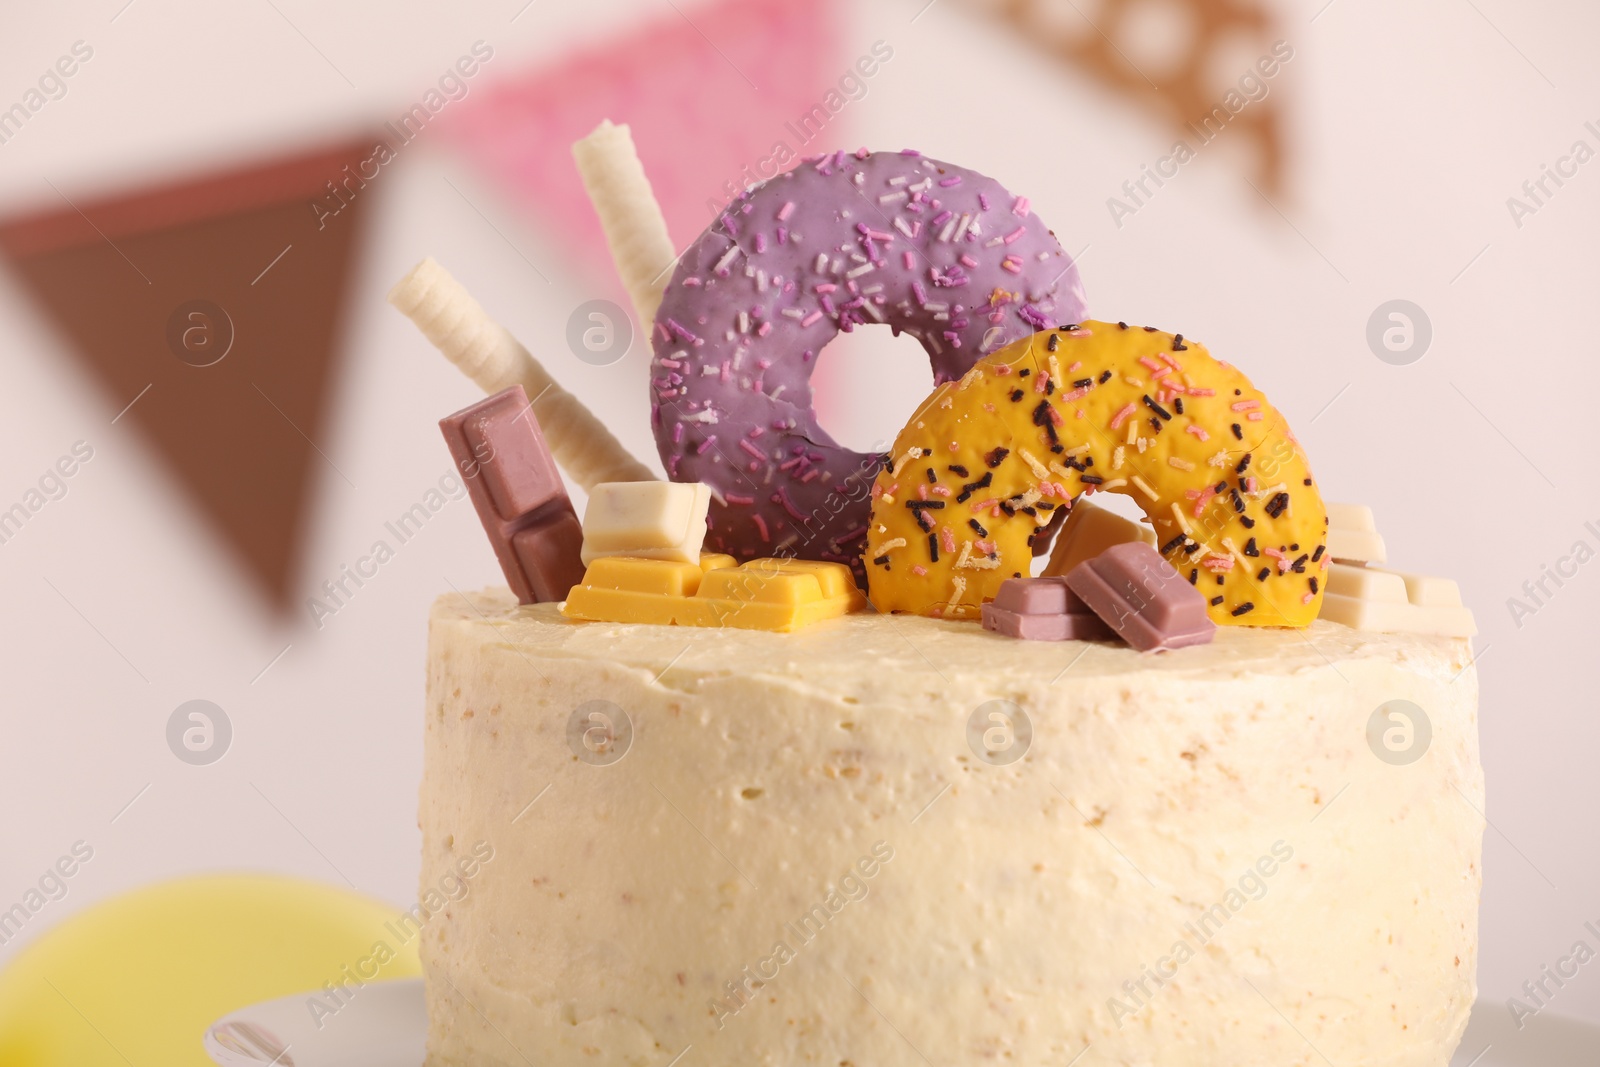 Photo of Delicious cake decorated with sweets against blurred background, closeup